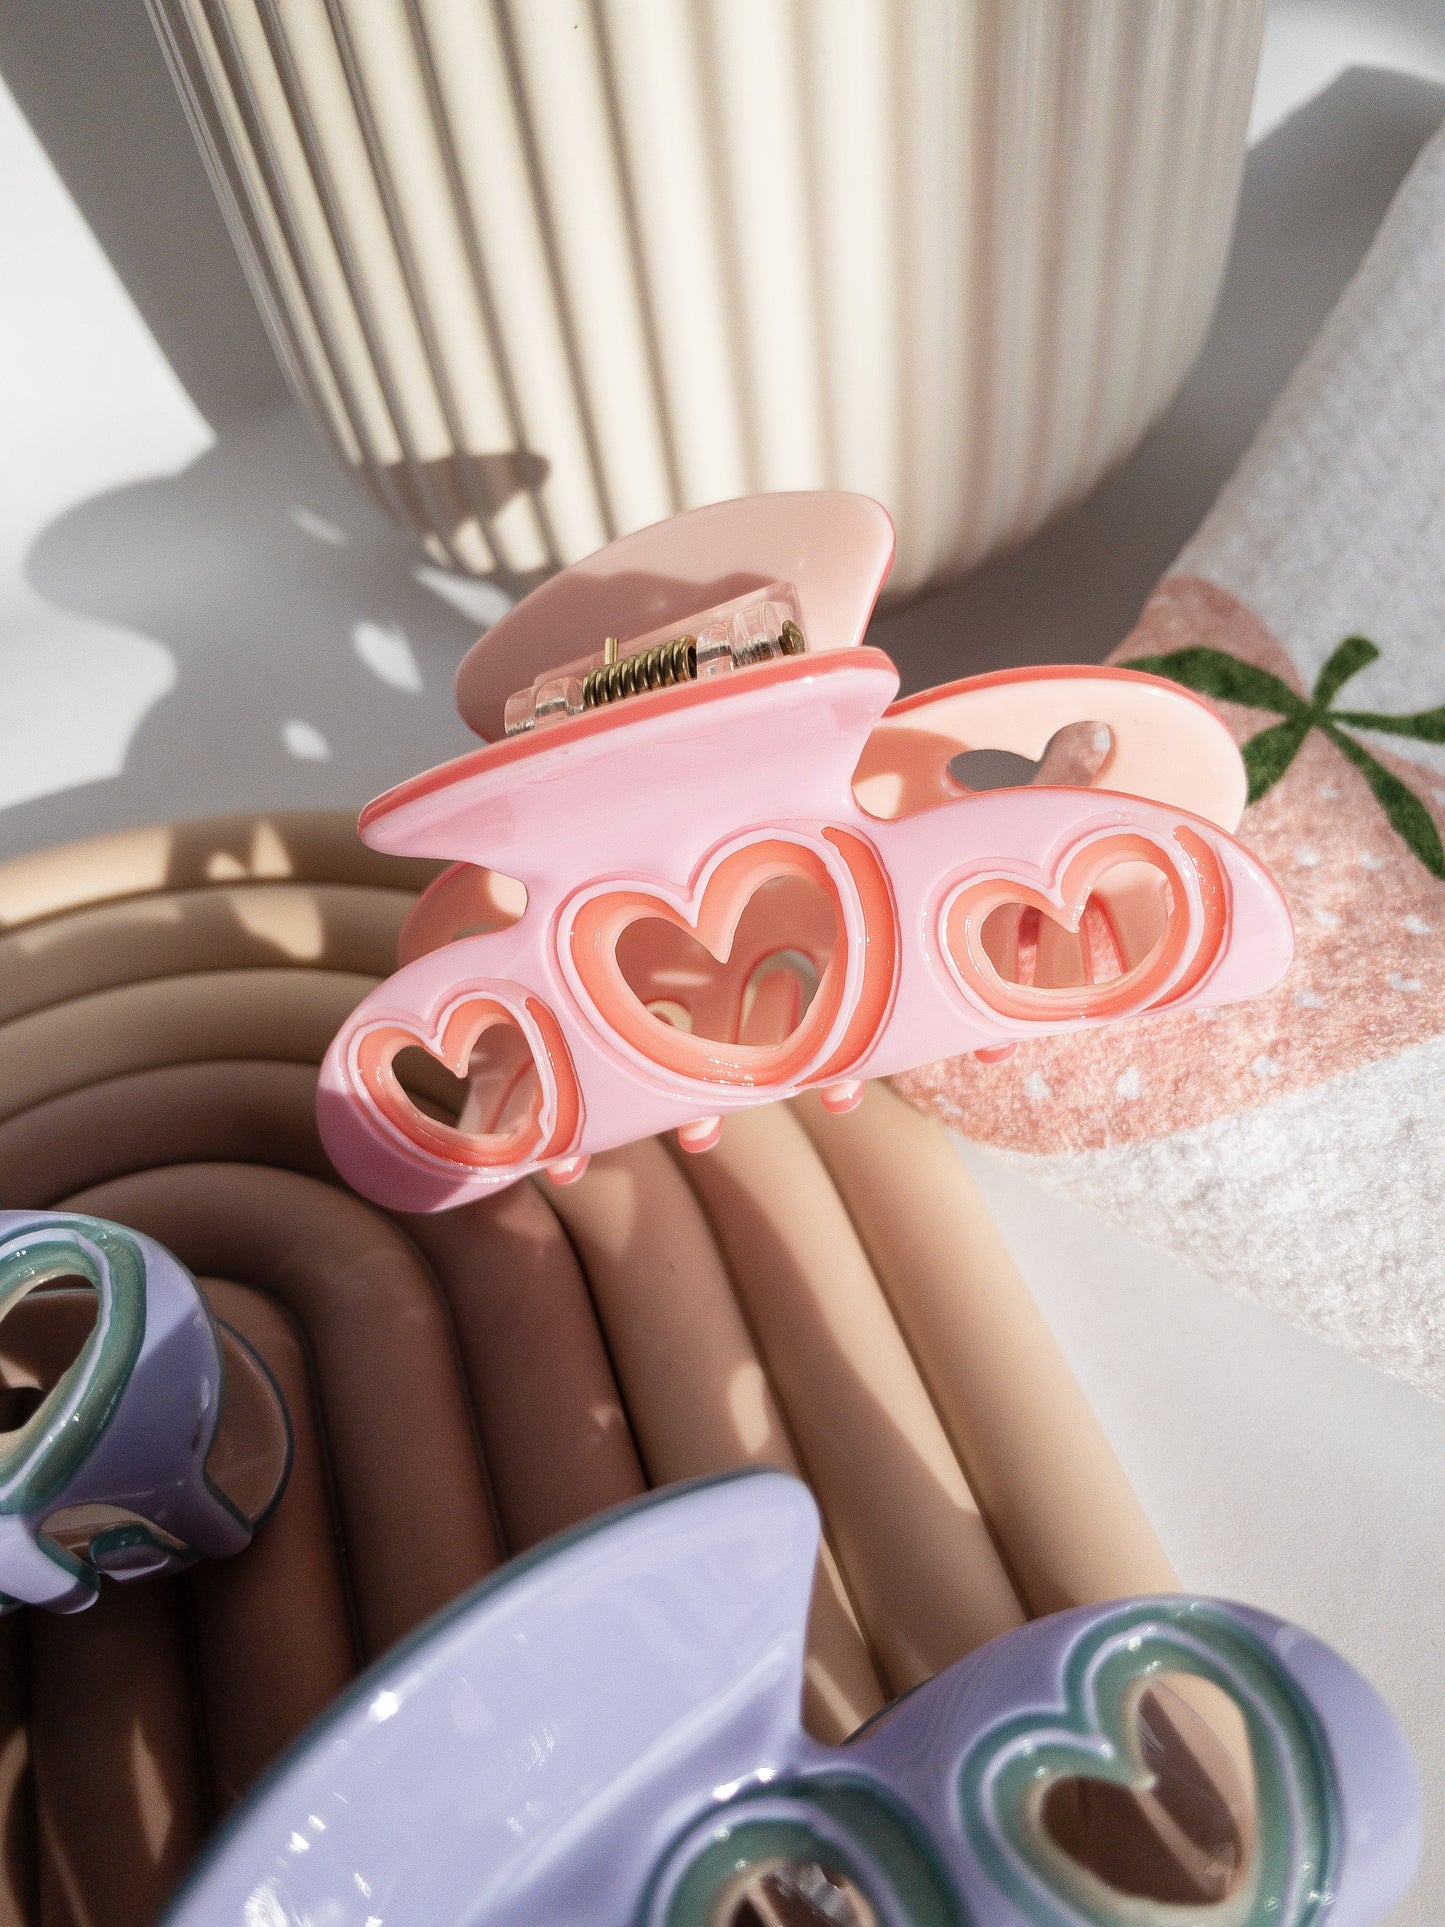 The hair claw clip for the sweethearts. The perfect medium size for half up hairstyles, strong and durable. Your hair is highlighted by the cut out hearts on each side. A beautiful sweet tart sugar pink color with a darker pink outline throughout. 